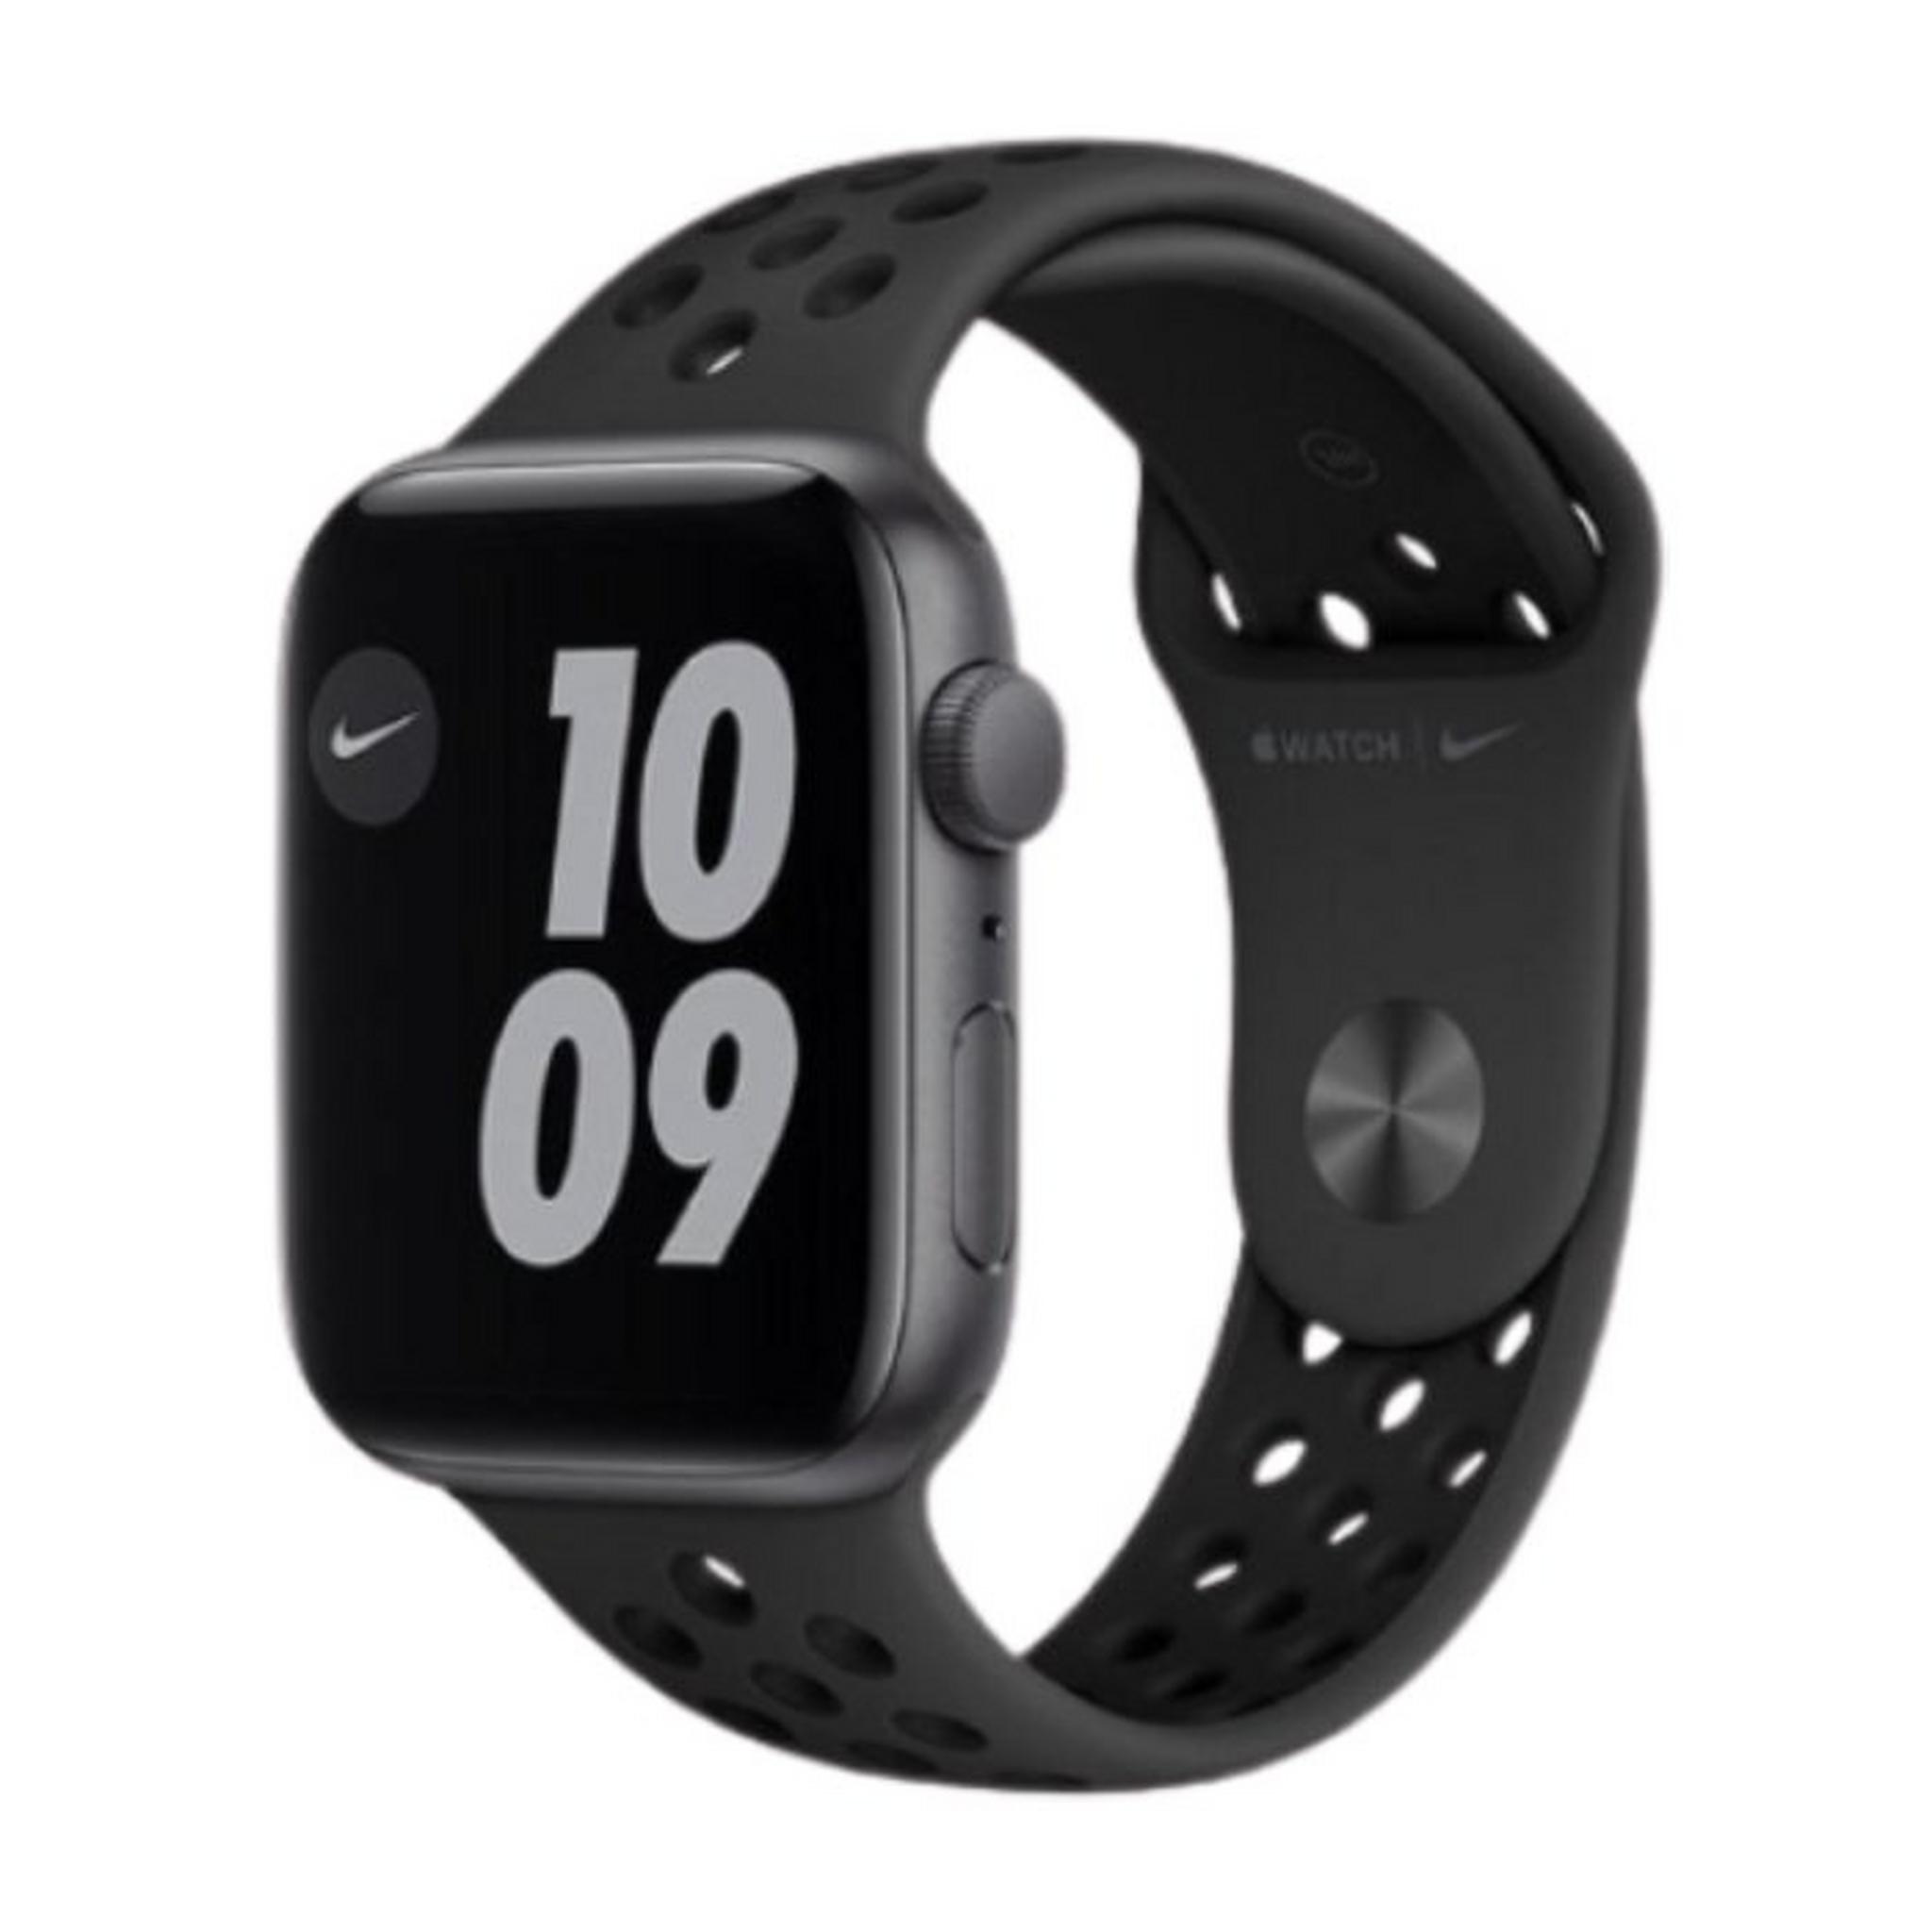 Apple Watch Nike Series 6 GPS 40mm Aluminum Case Smart Watch - Space Gray / Anthracite Black